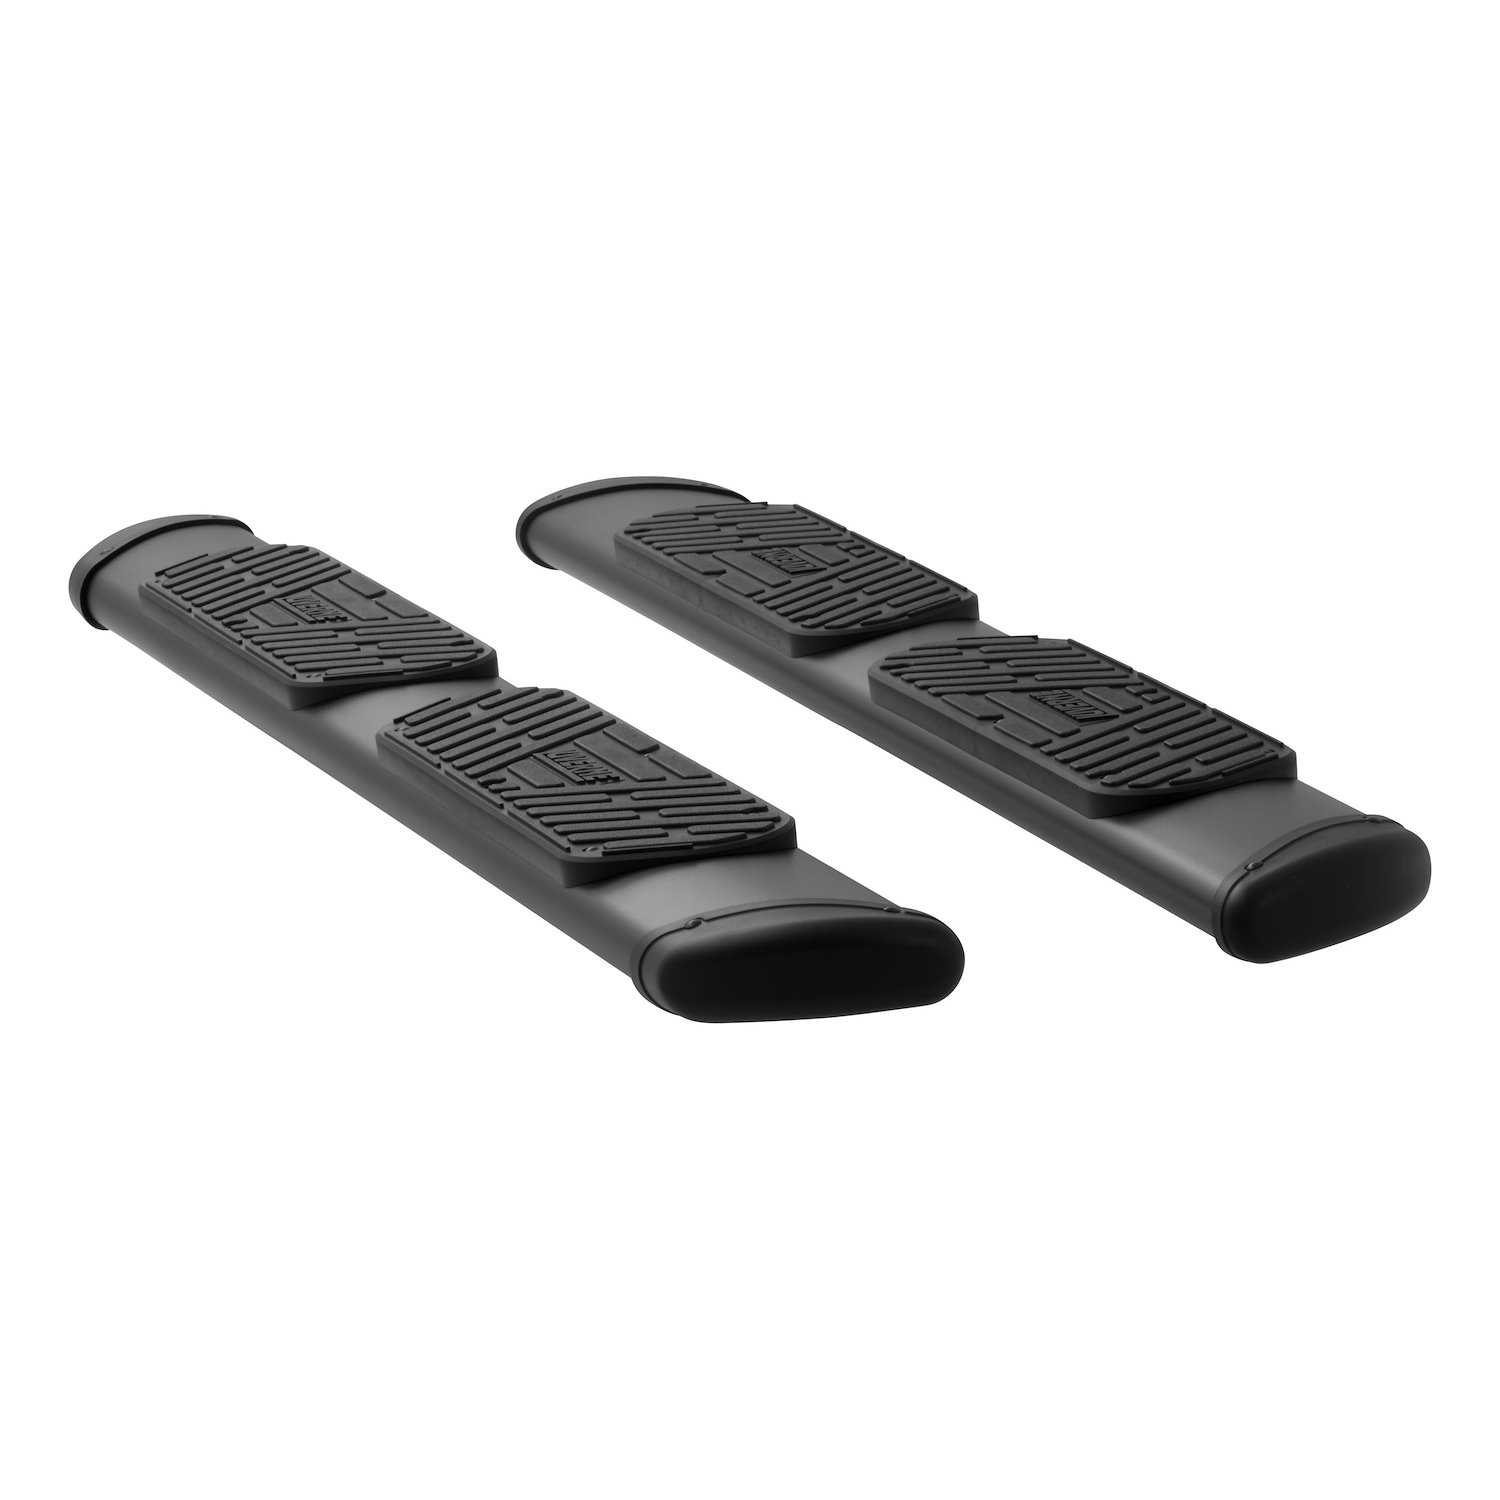 277078-401443 Regal 7 Black Stainless 78 in. Oval Side Steps Fits Select Chevy Silverado, GMC Sierra